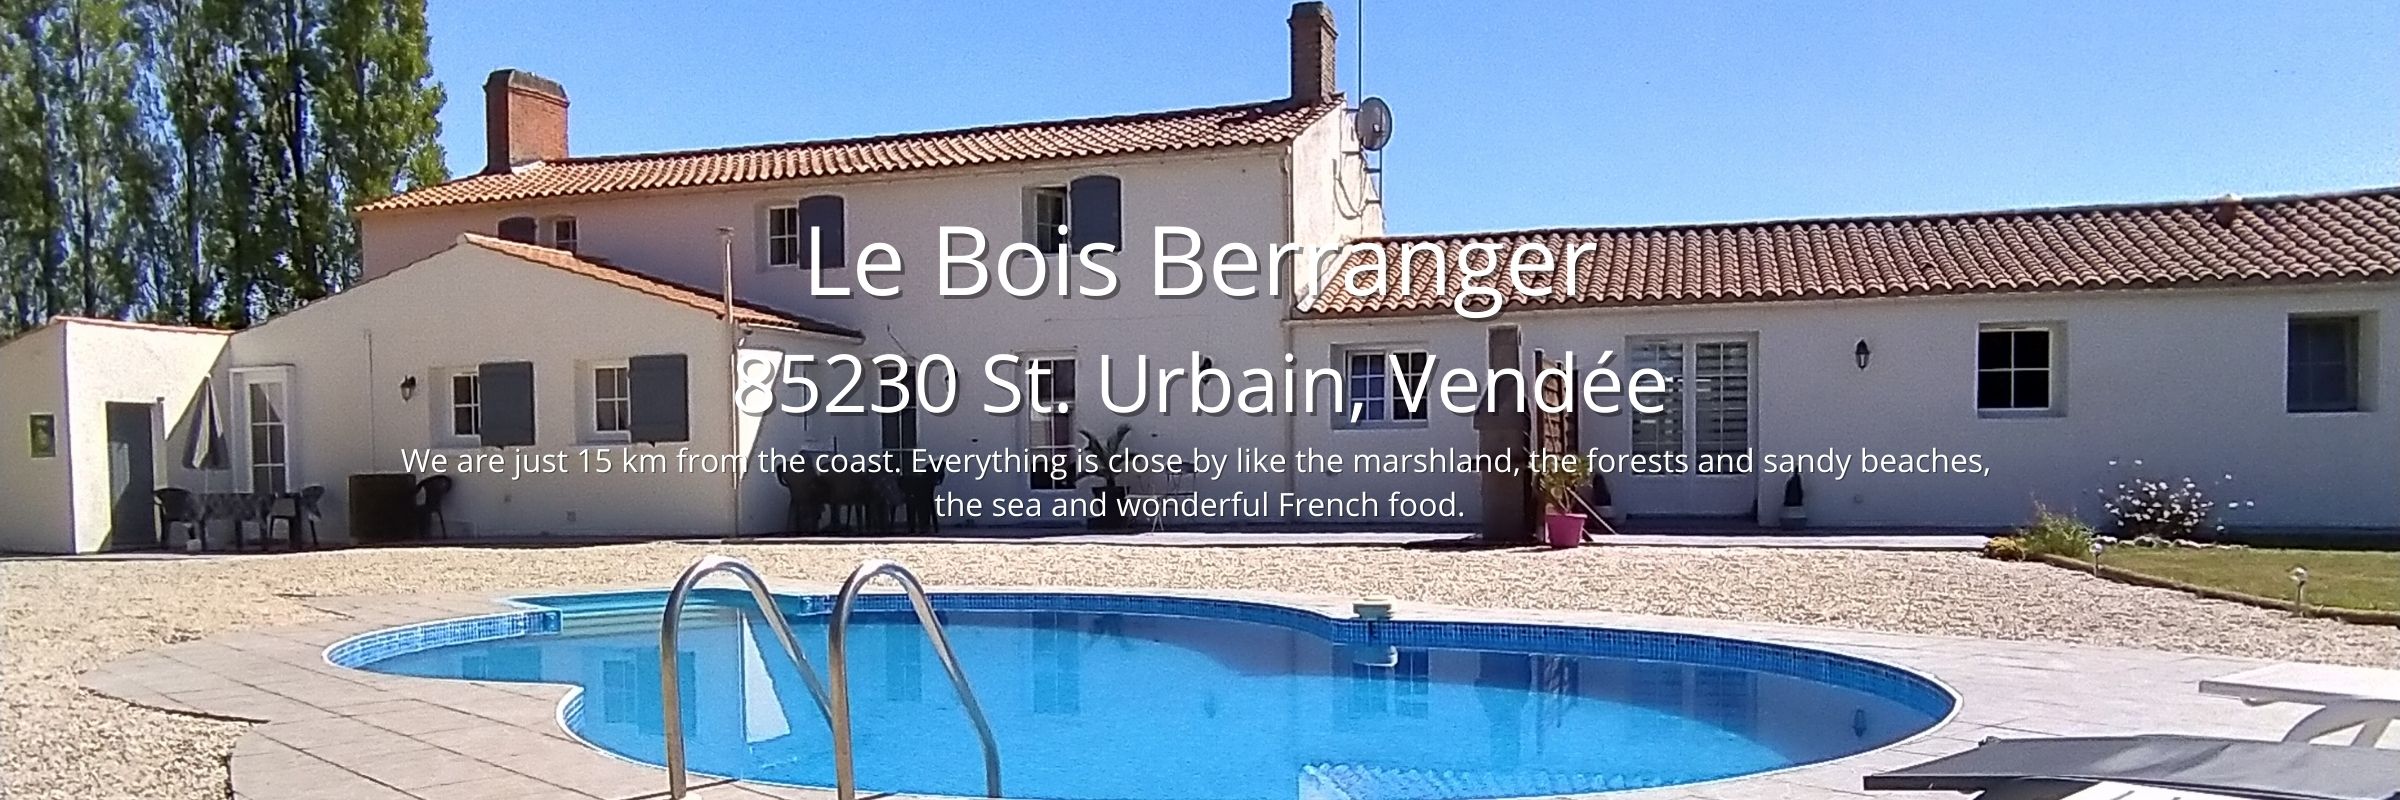 holiday cottages with swimmingpool in the Vendee